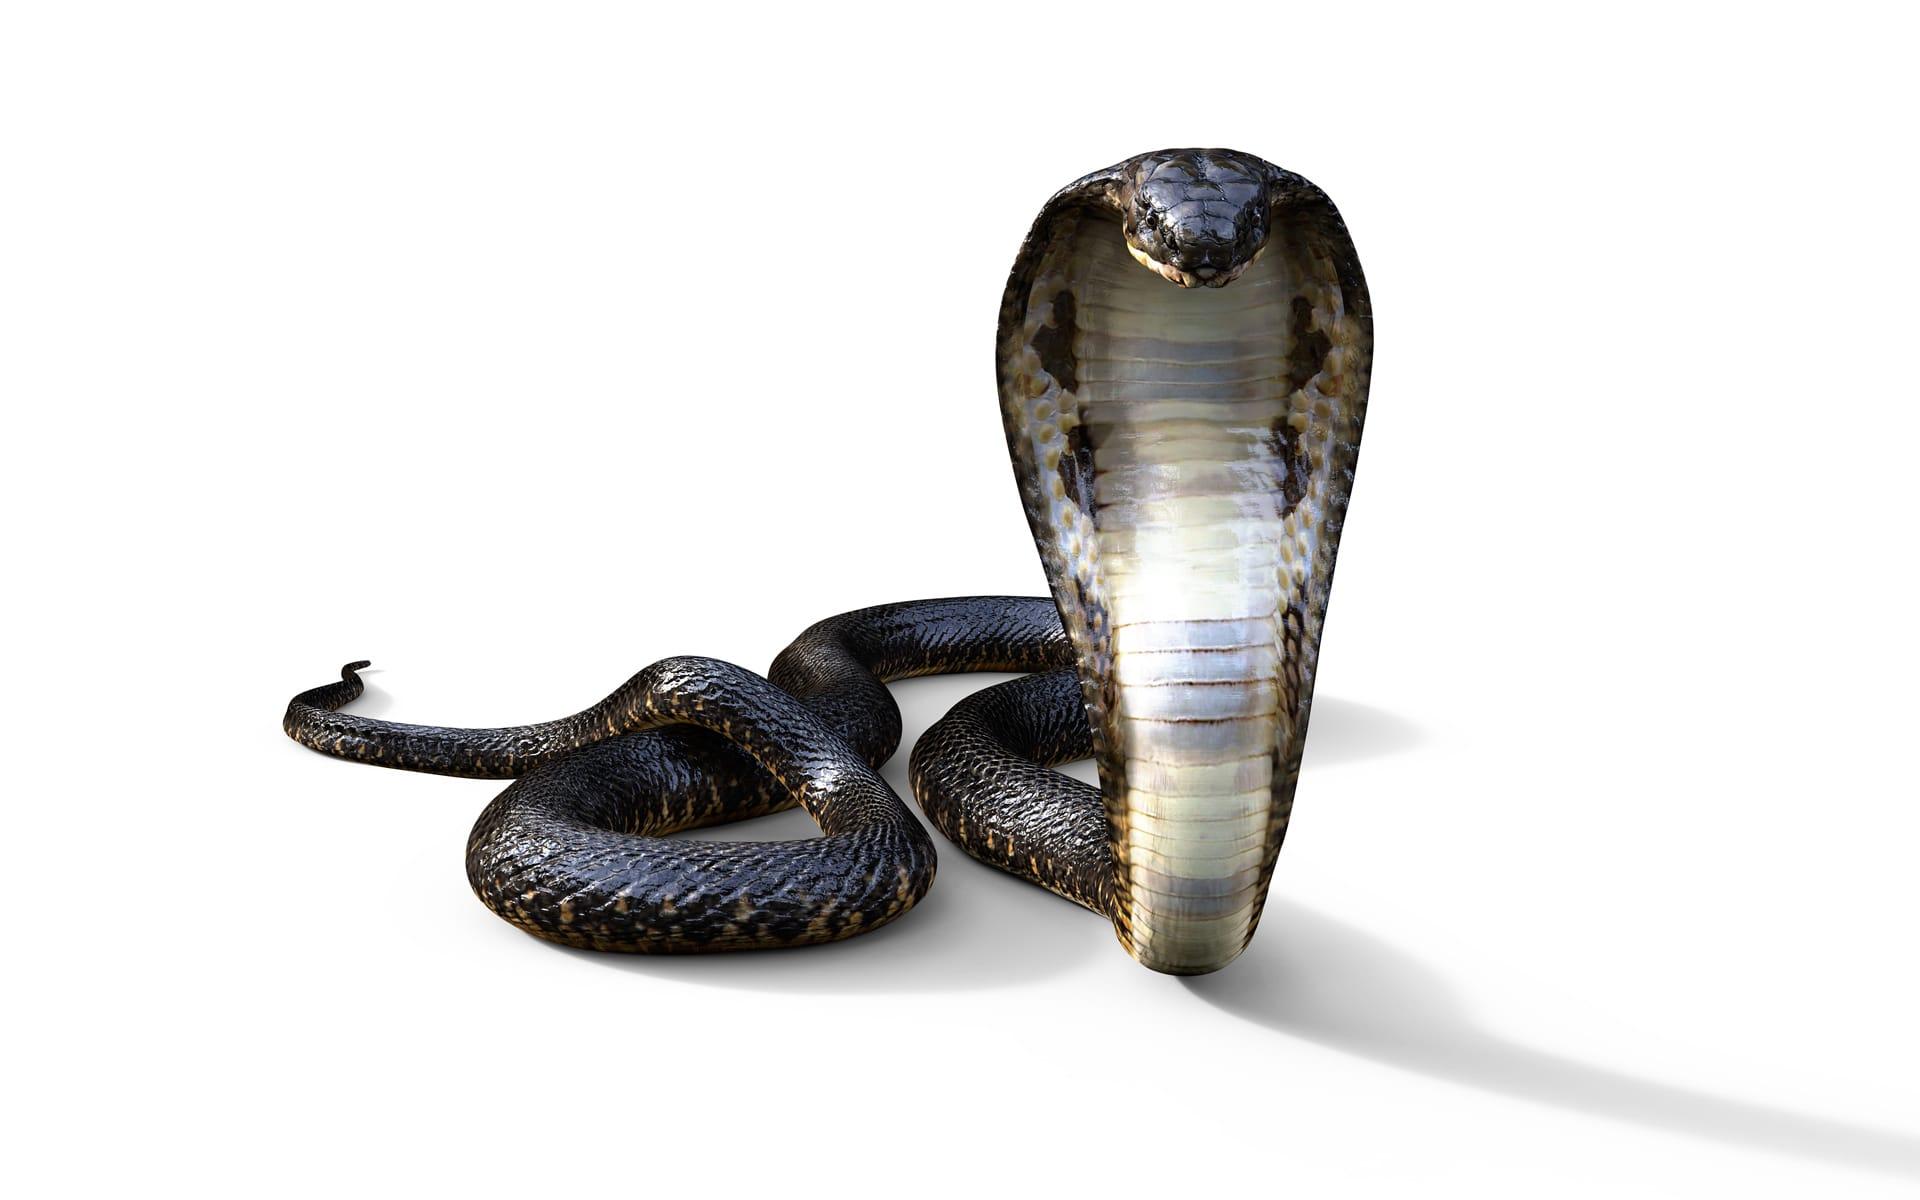 King cobra pictures